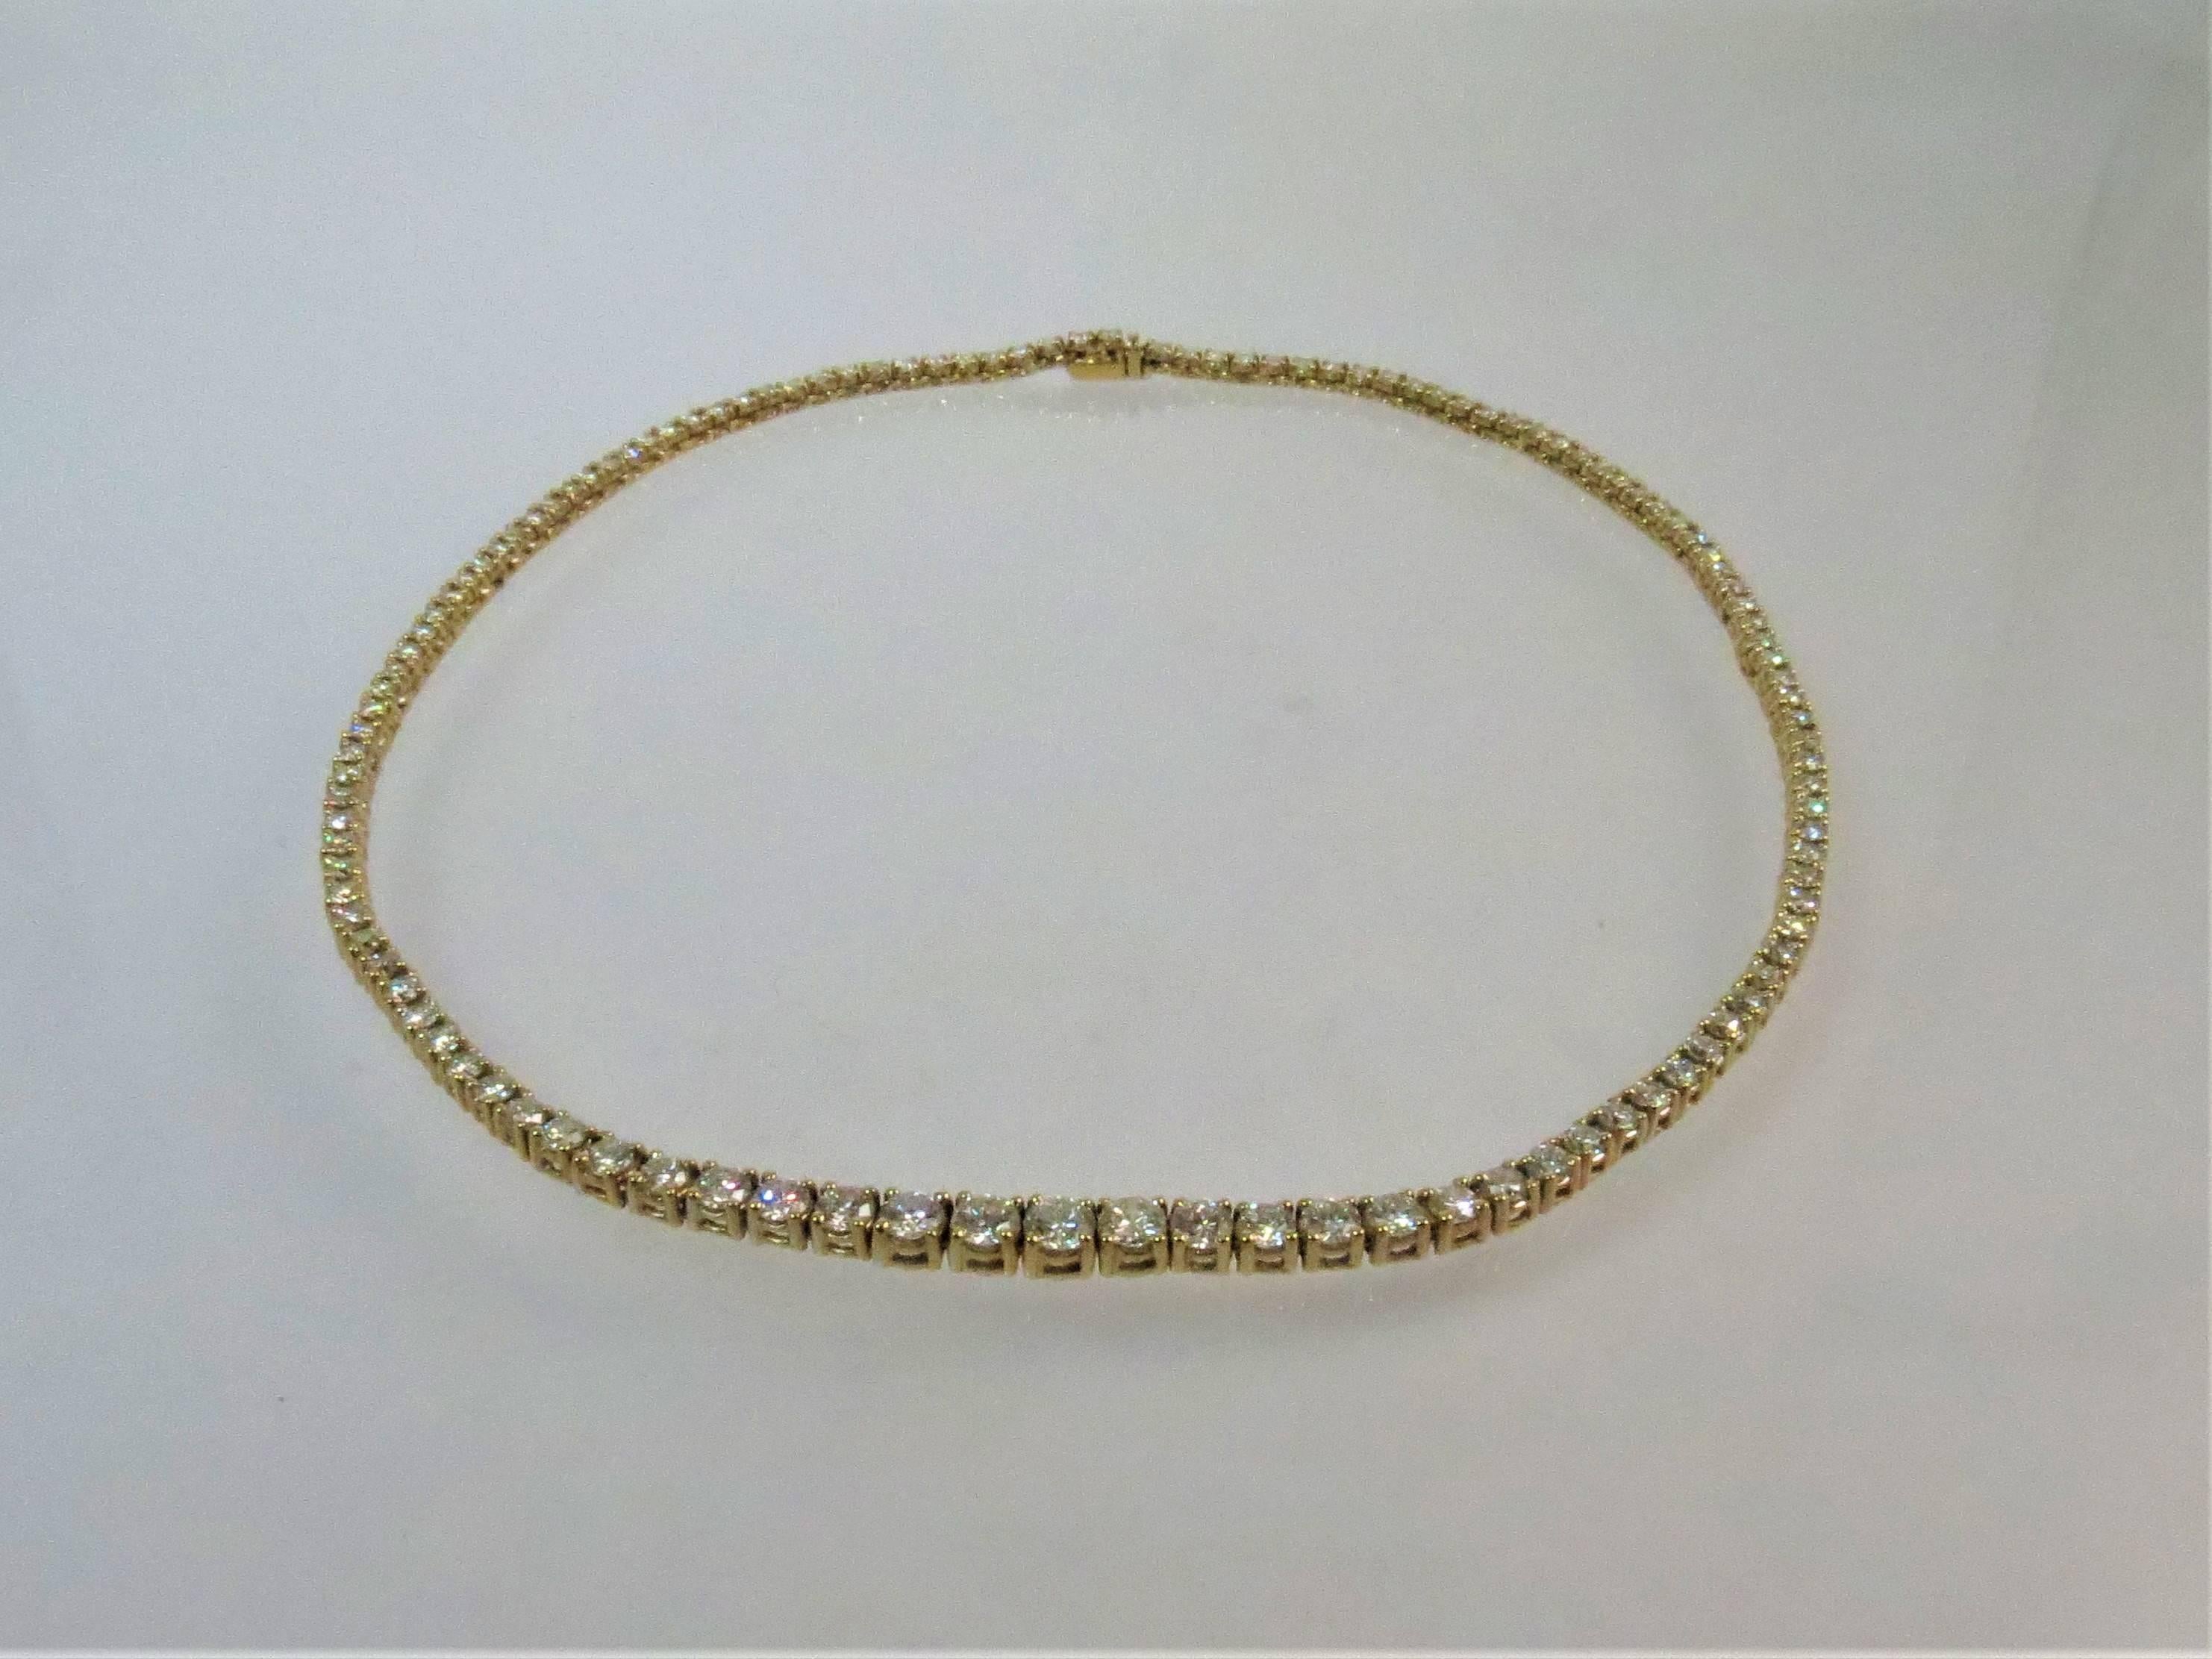 Gorgeous 14K yellow gold graduating diamond necklace, prong set with 120 full cut round diamonds weighing approximately 8cts total, graduating from .30cts to .5ct,  H-I color, VS-SI1 clarity.